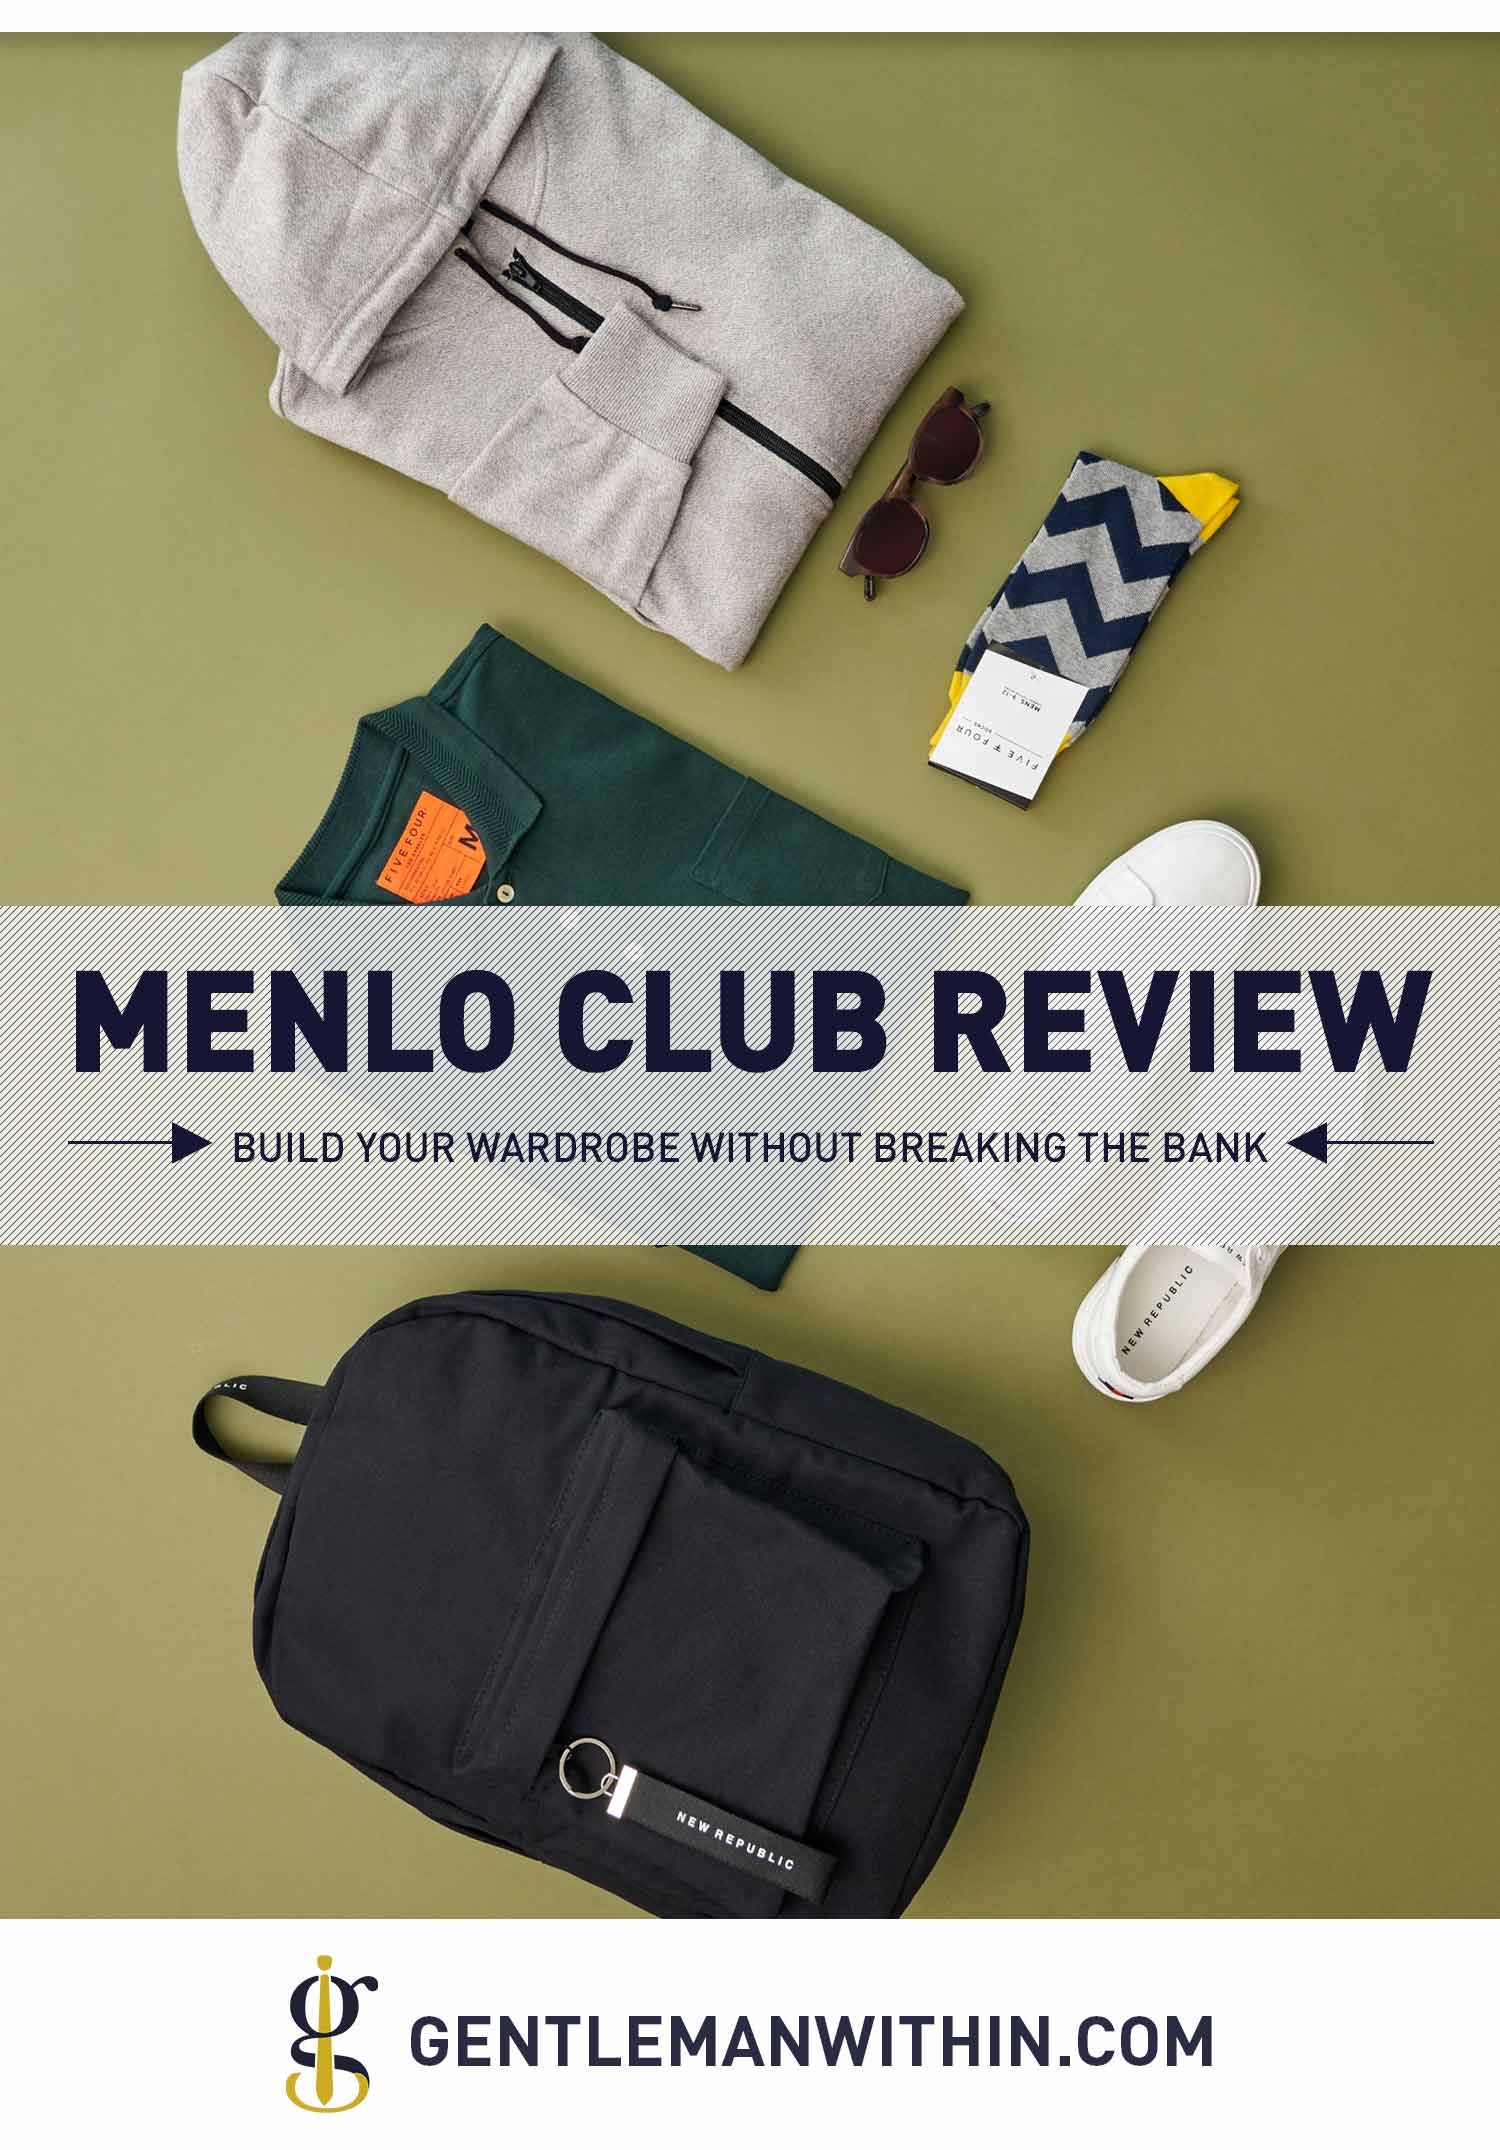 Menlo Club Review: Build Your Wardrobe Without Breaking The Bank | GENTLEMAN WITHIN